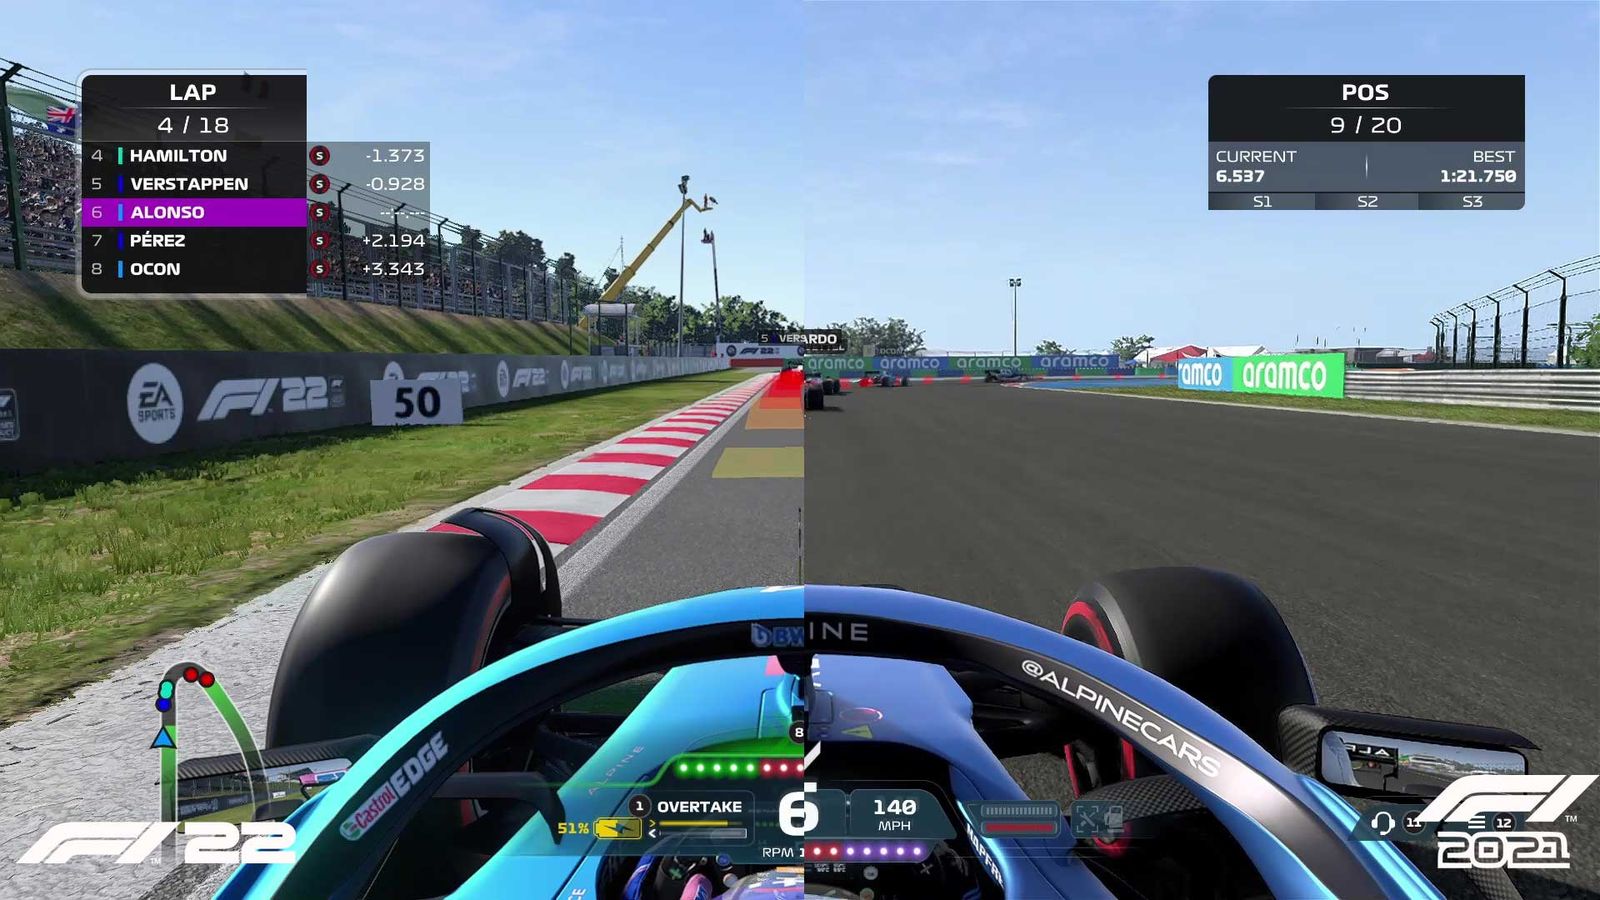 F1 22 REVIEW: New cars, same game